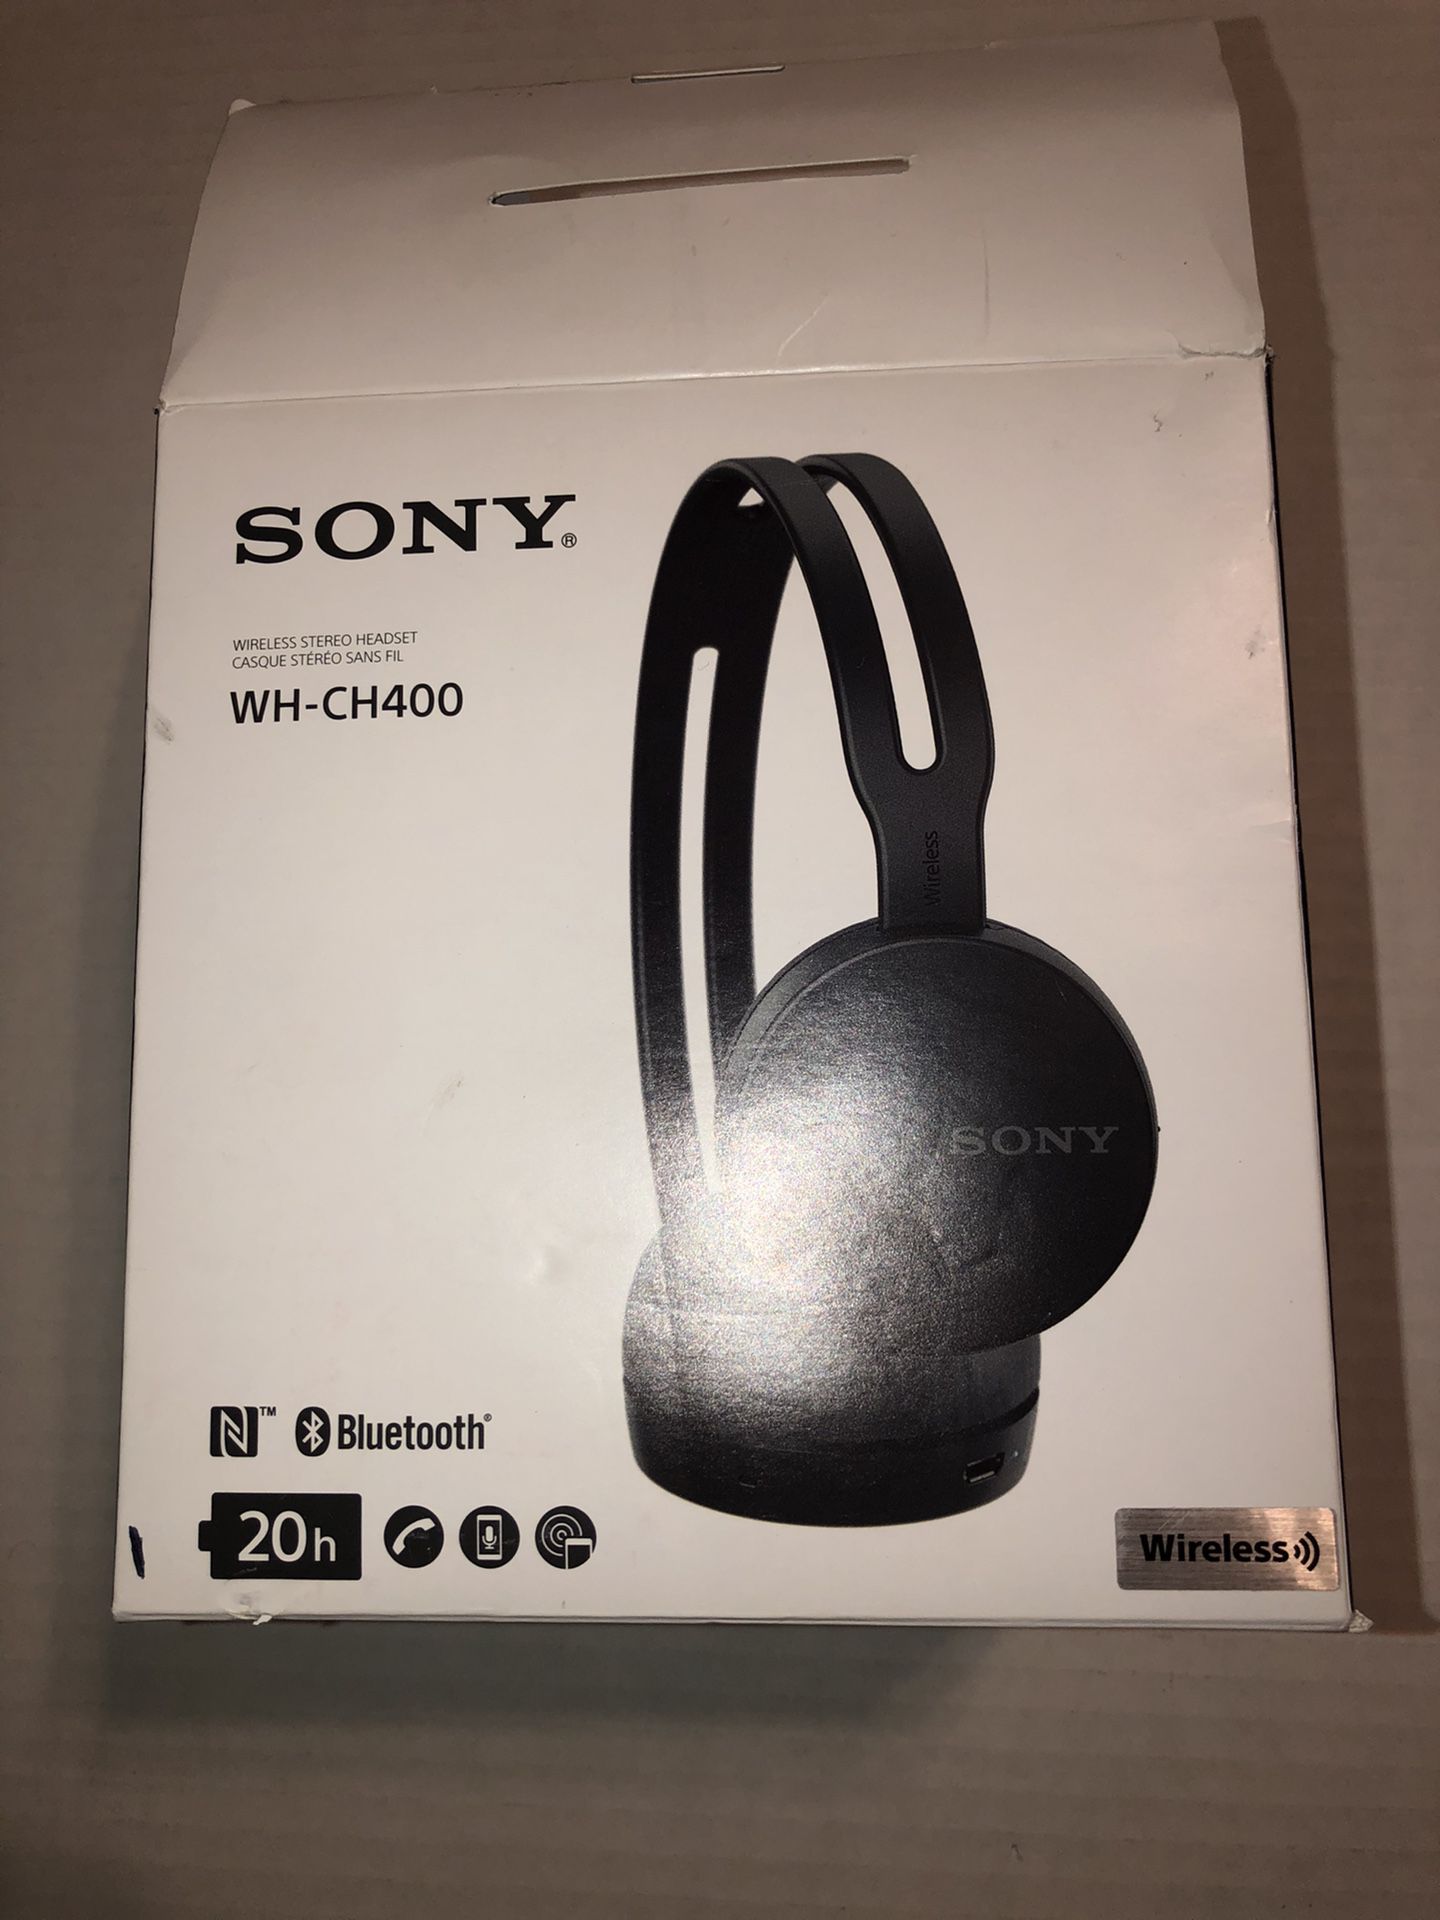 SONY WH-CH400 Wireless Stereo Headset